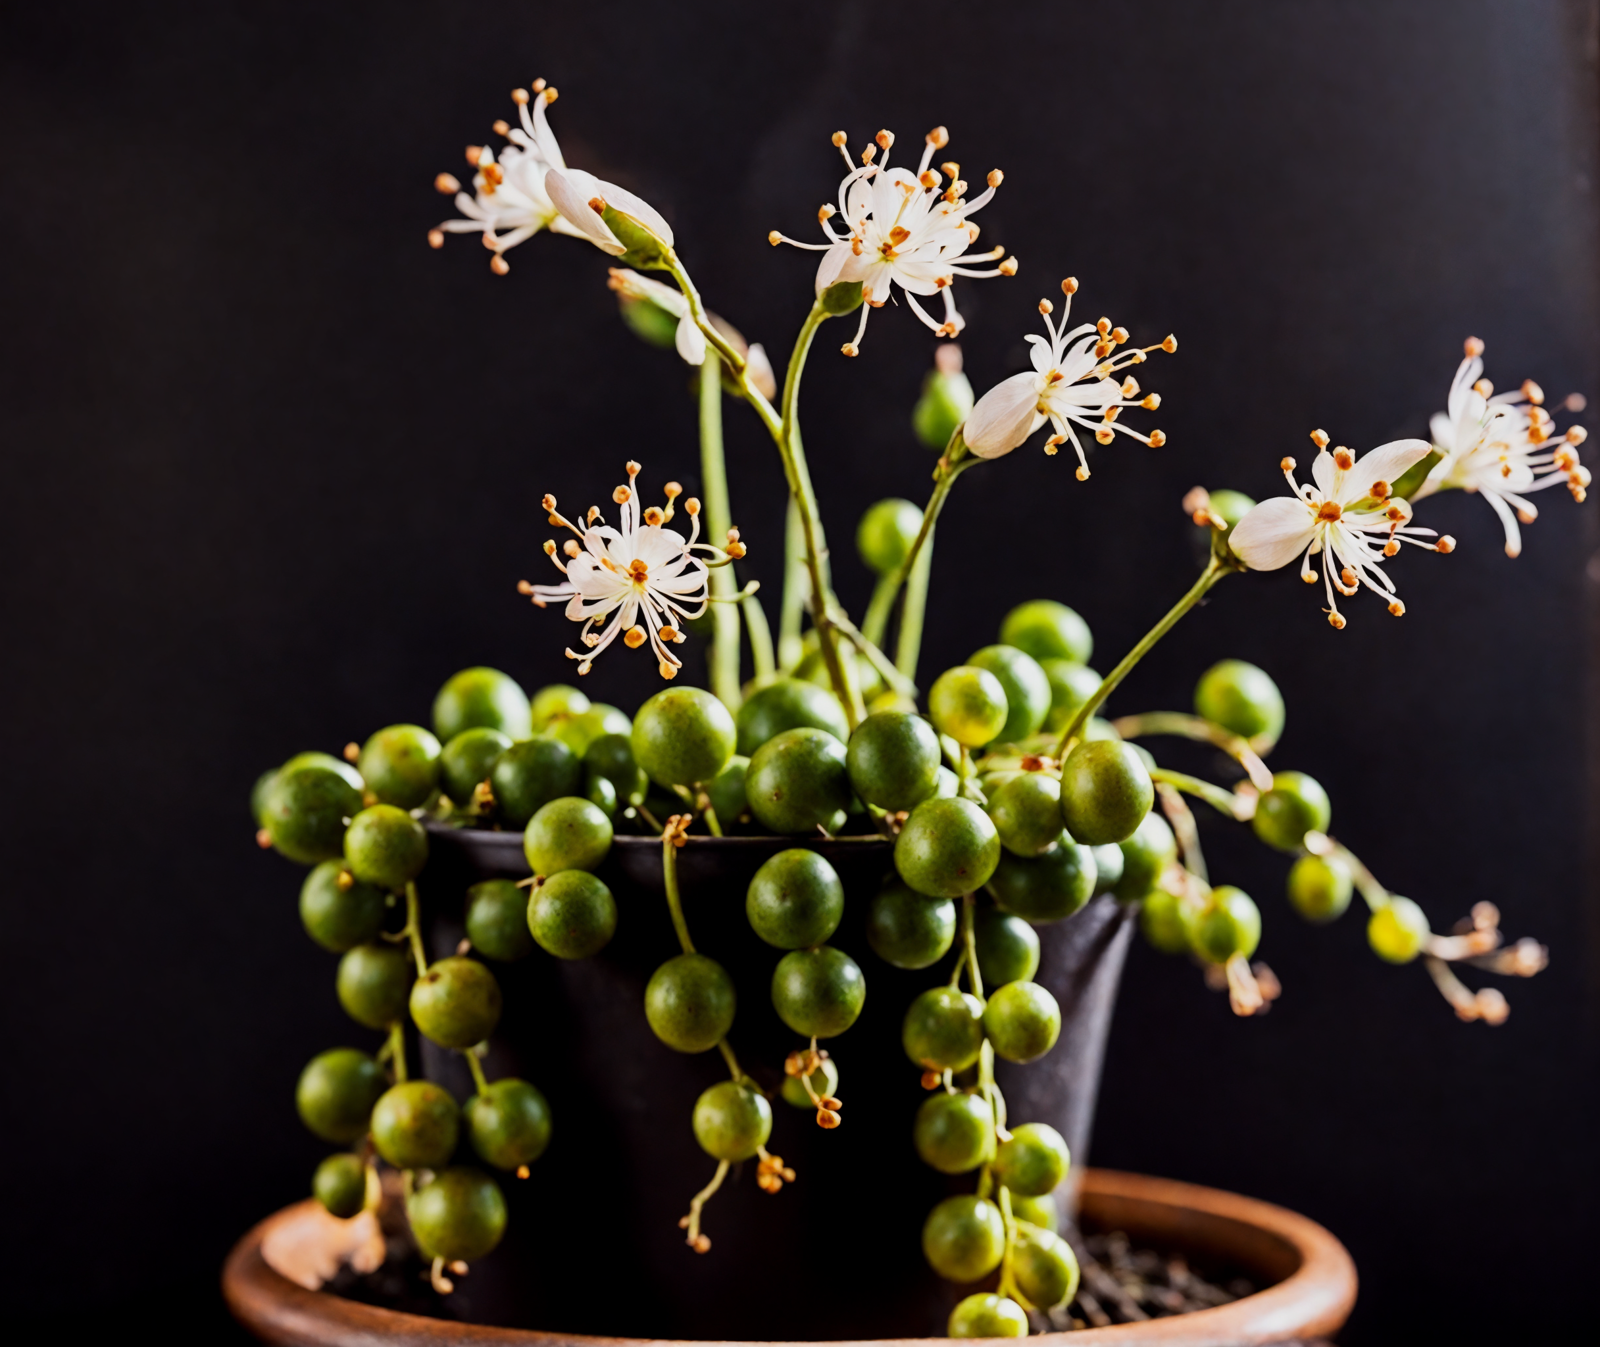 Curio rowleyanus (String of Pearls) with spherical leaves and small white flowers in a bowl, clear indoor lighting.